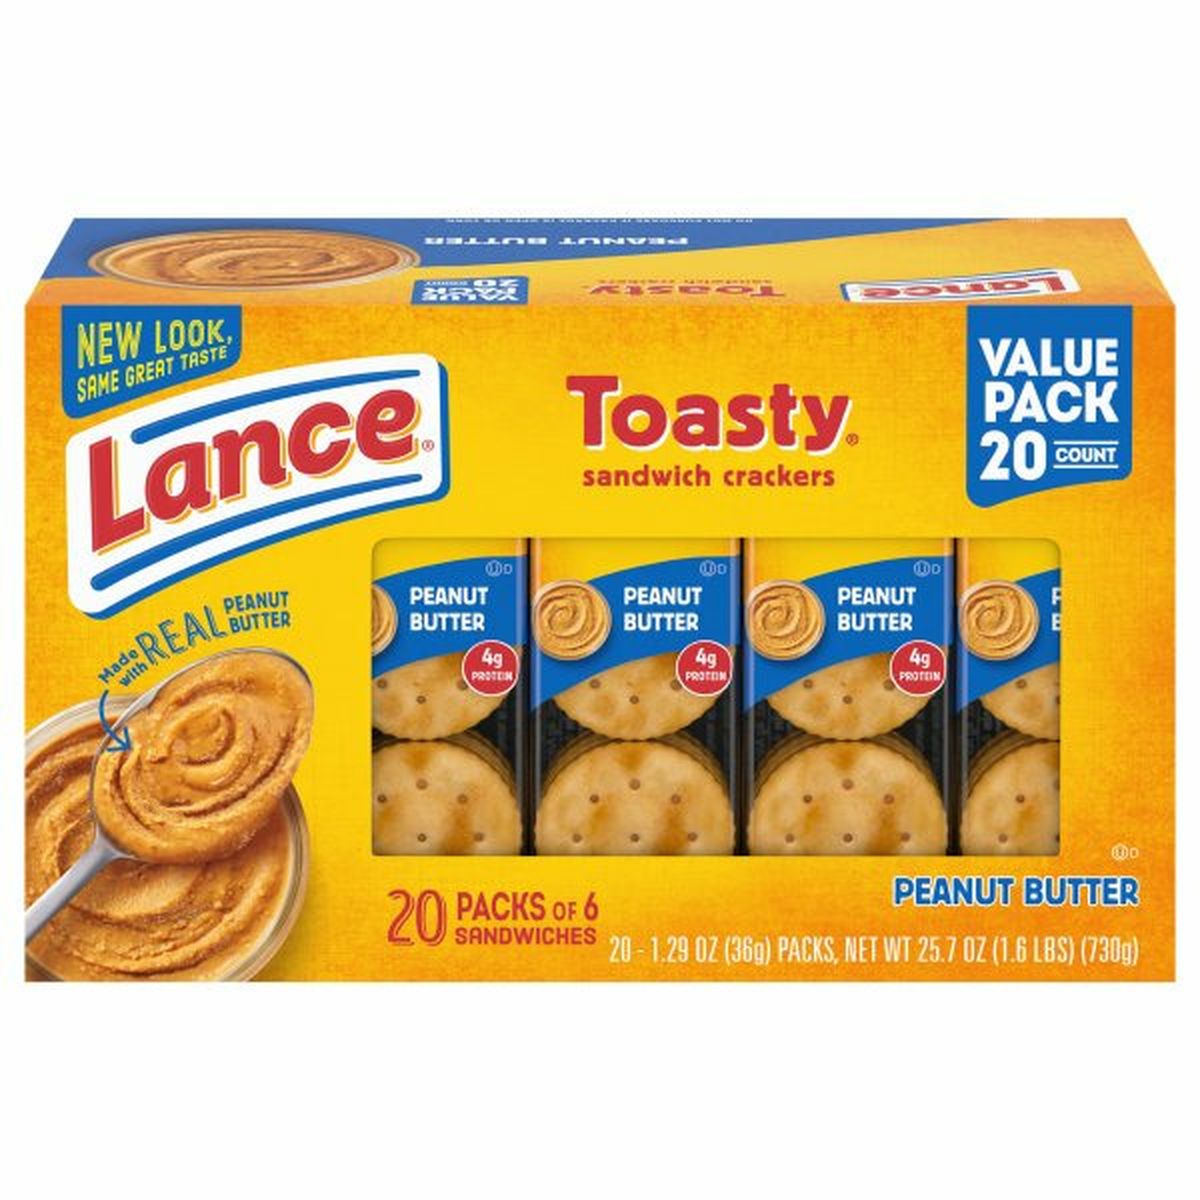 Calories in Lances Toasty Sandwich Crackers, Peanut Butter, Value Pack